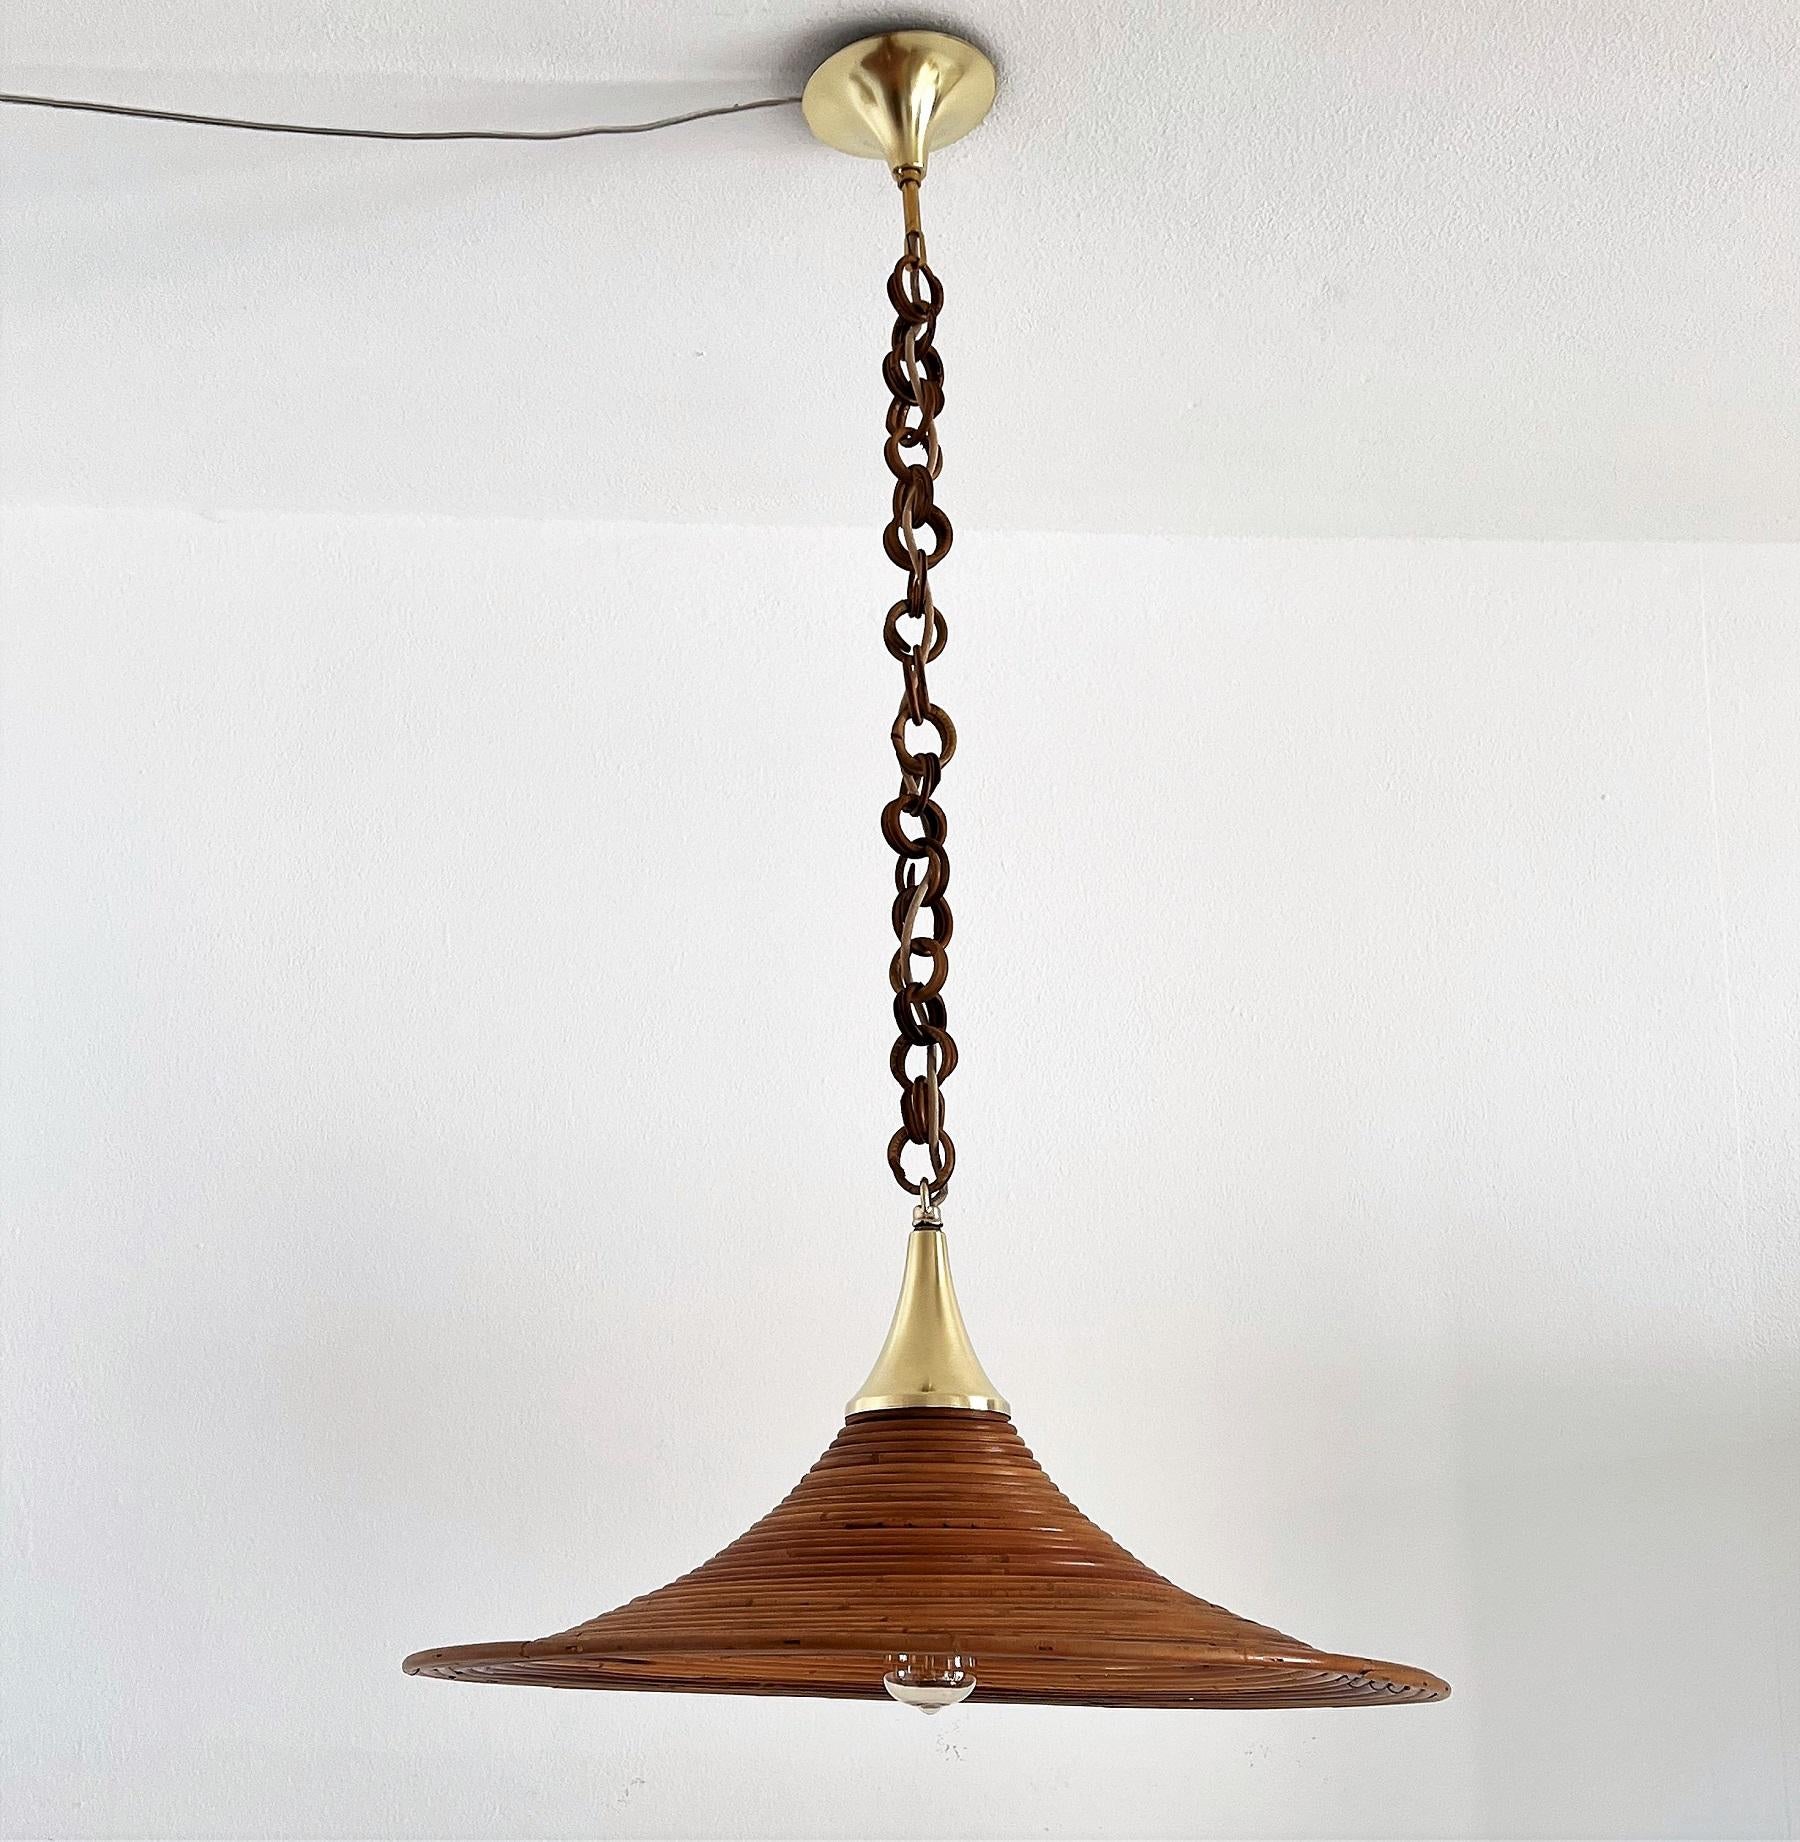 Gorgeous pendant lamp hand-crafted of curved bamboo with brass details and original wicker chain.
The pendant lamp is in very good original condition, the bamboo without defects but may of course show little signs of age as different color nuances